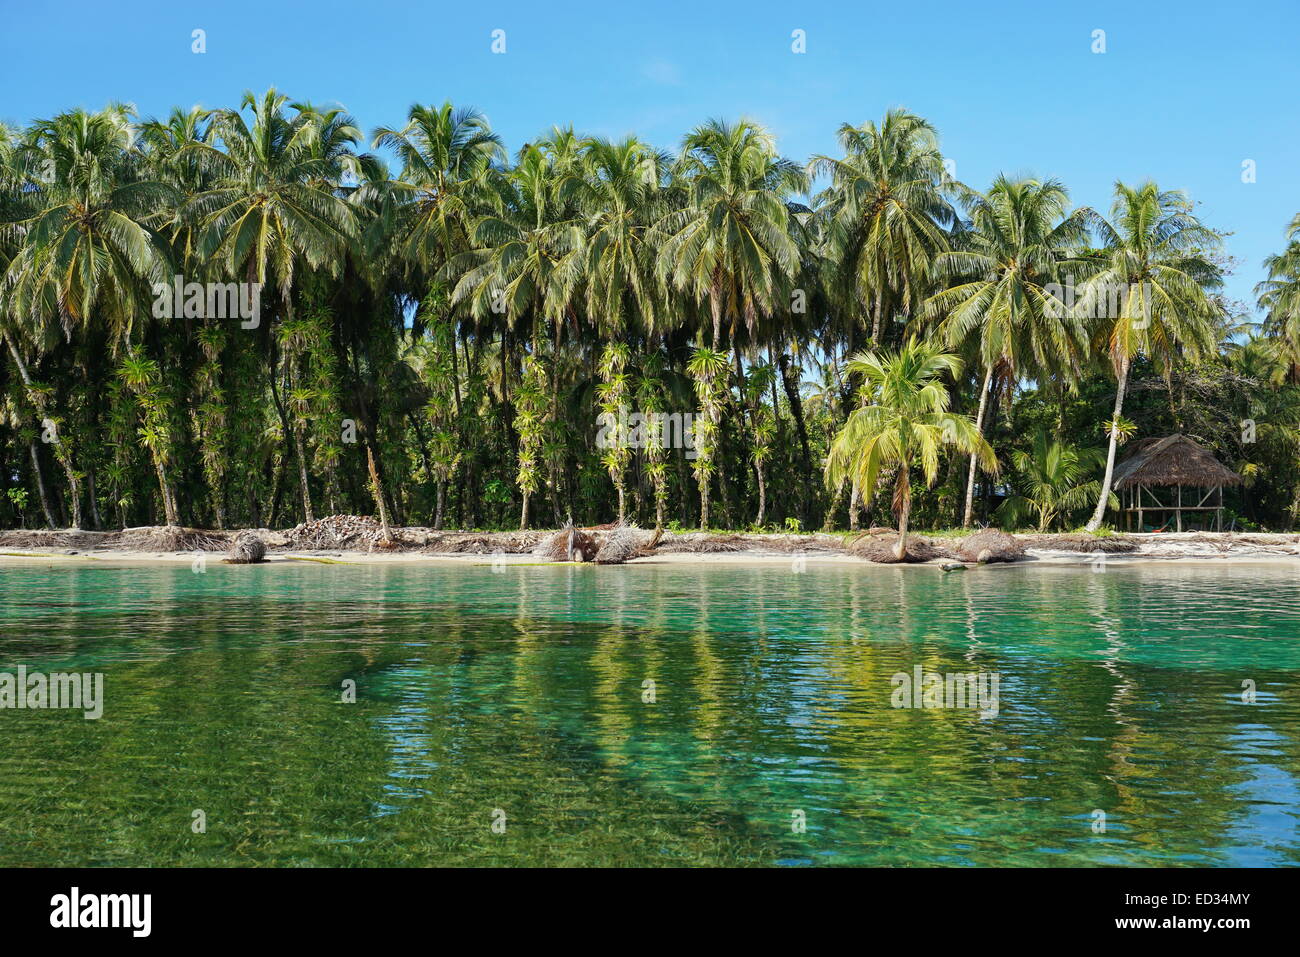 Lush coconut trees with epiphytes and a rustic thatched hut on tropical shore, Caribbean sea, Zapatillas islands, Panama Stock Photo